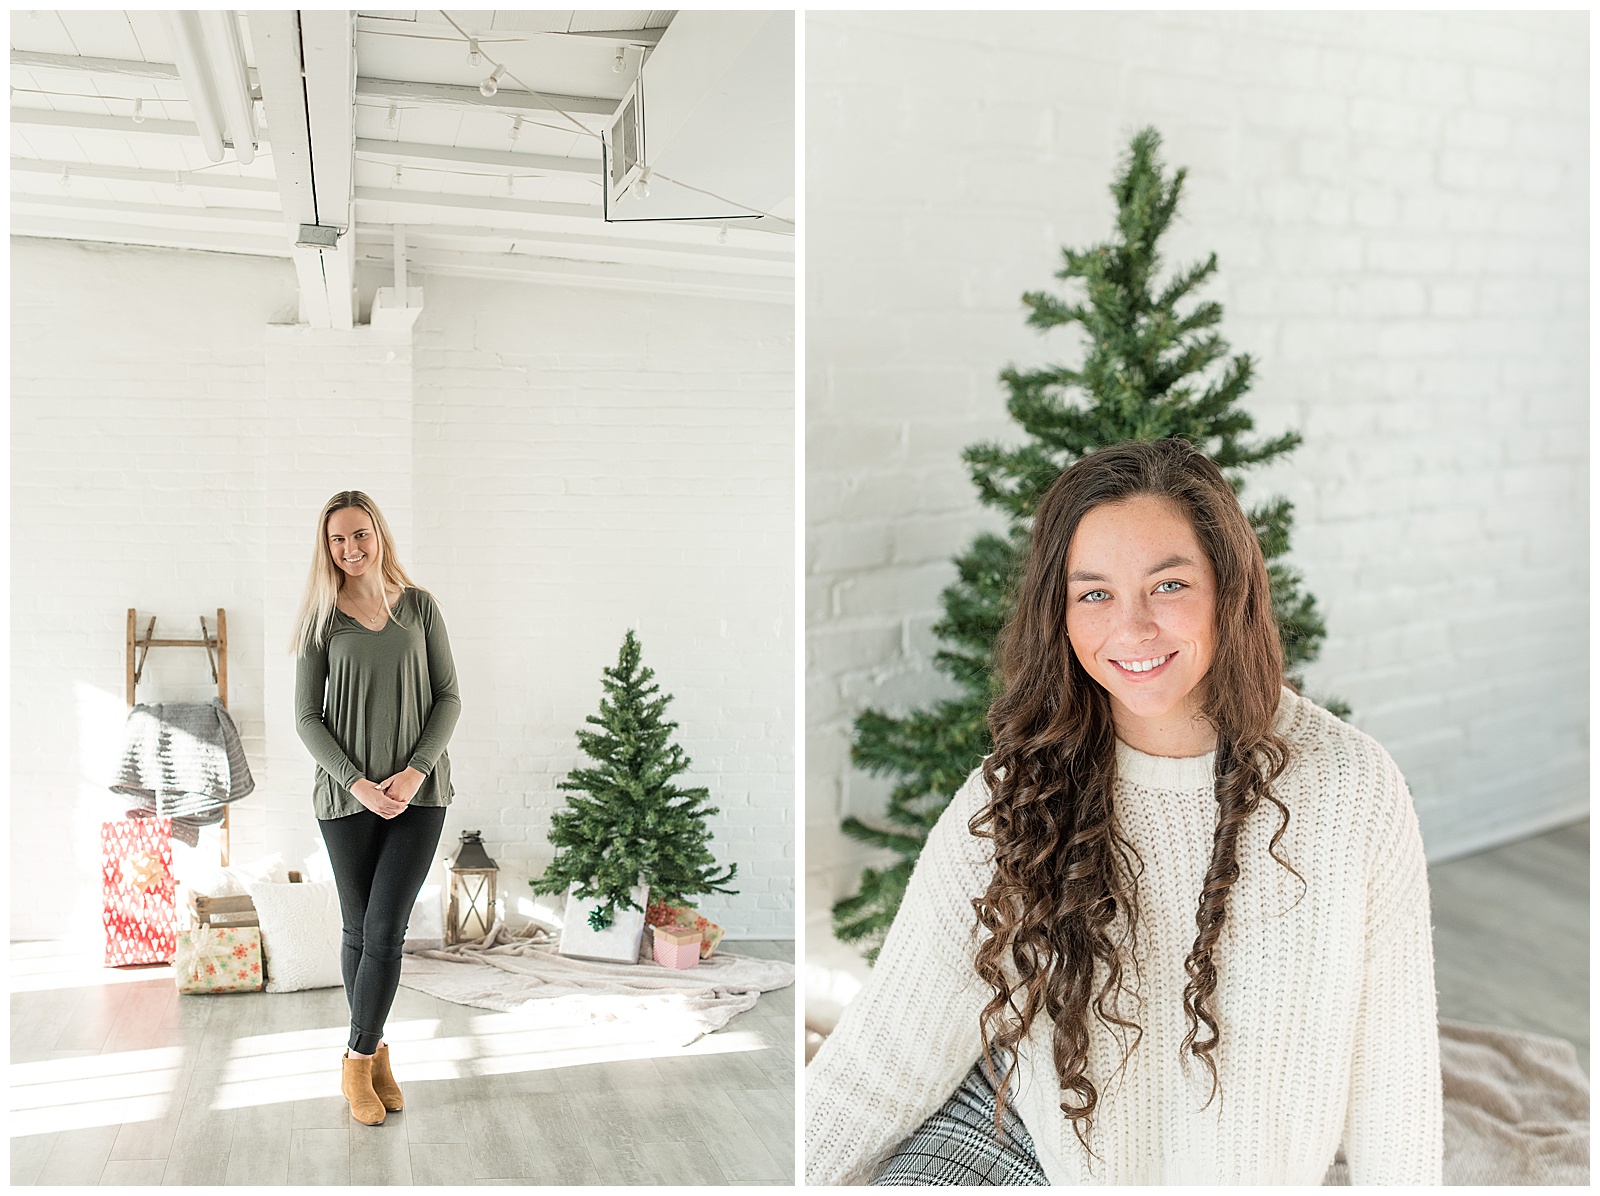 girls posing by christmas tree and other decorations in bright white room